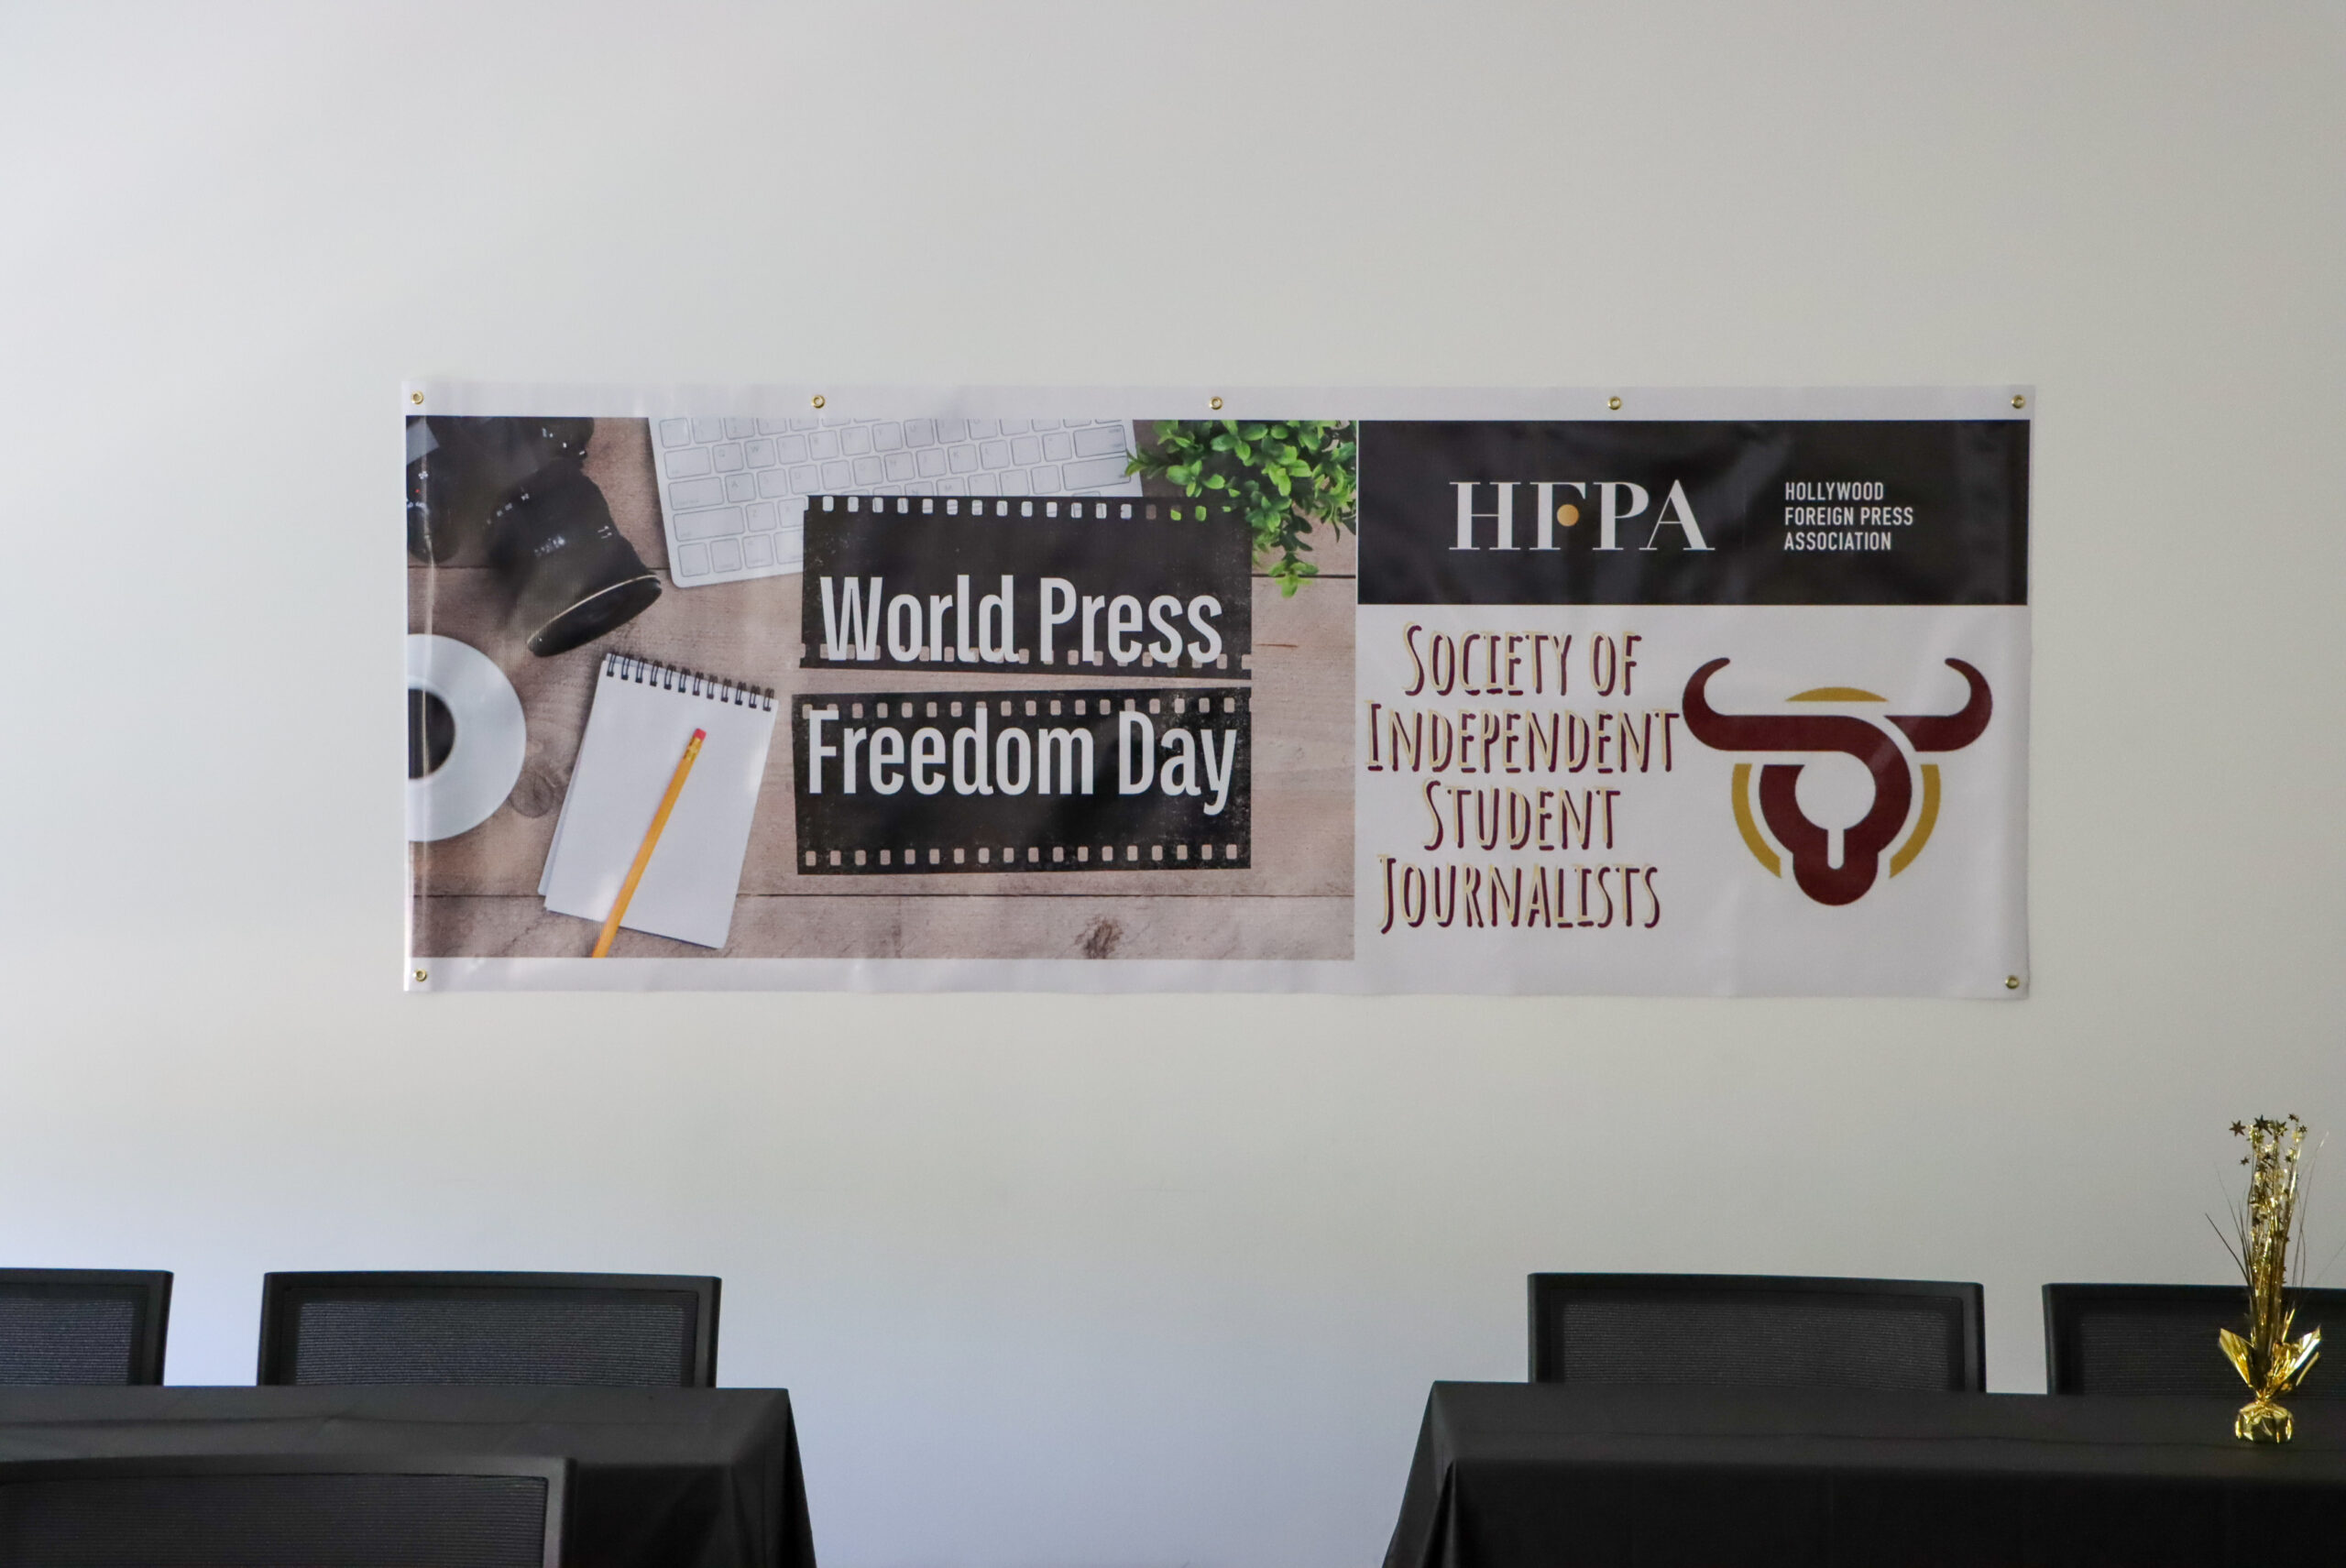 A Lesson in Objectivity is Taught at World Press Freedom Day